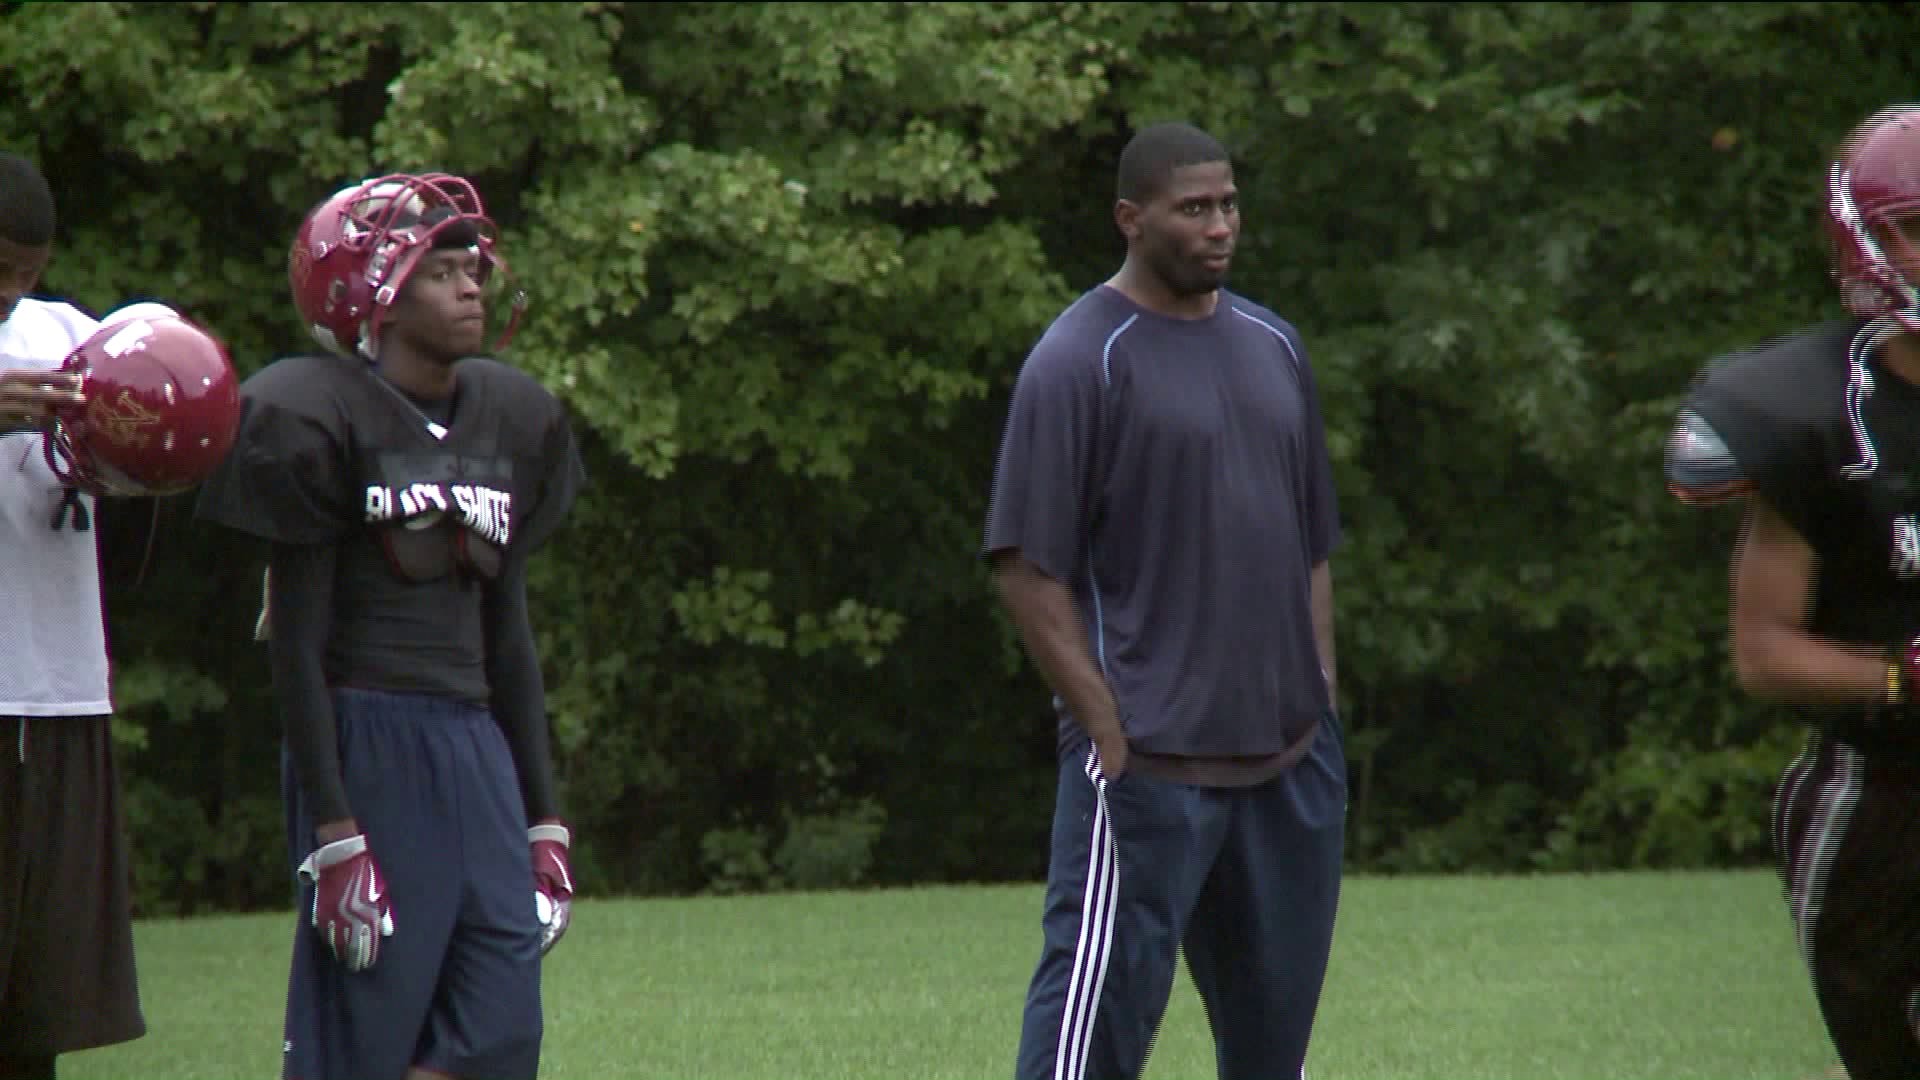 New Britain football coach coached without certificate